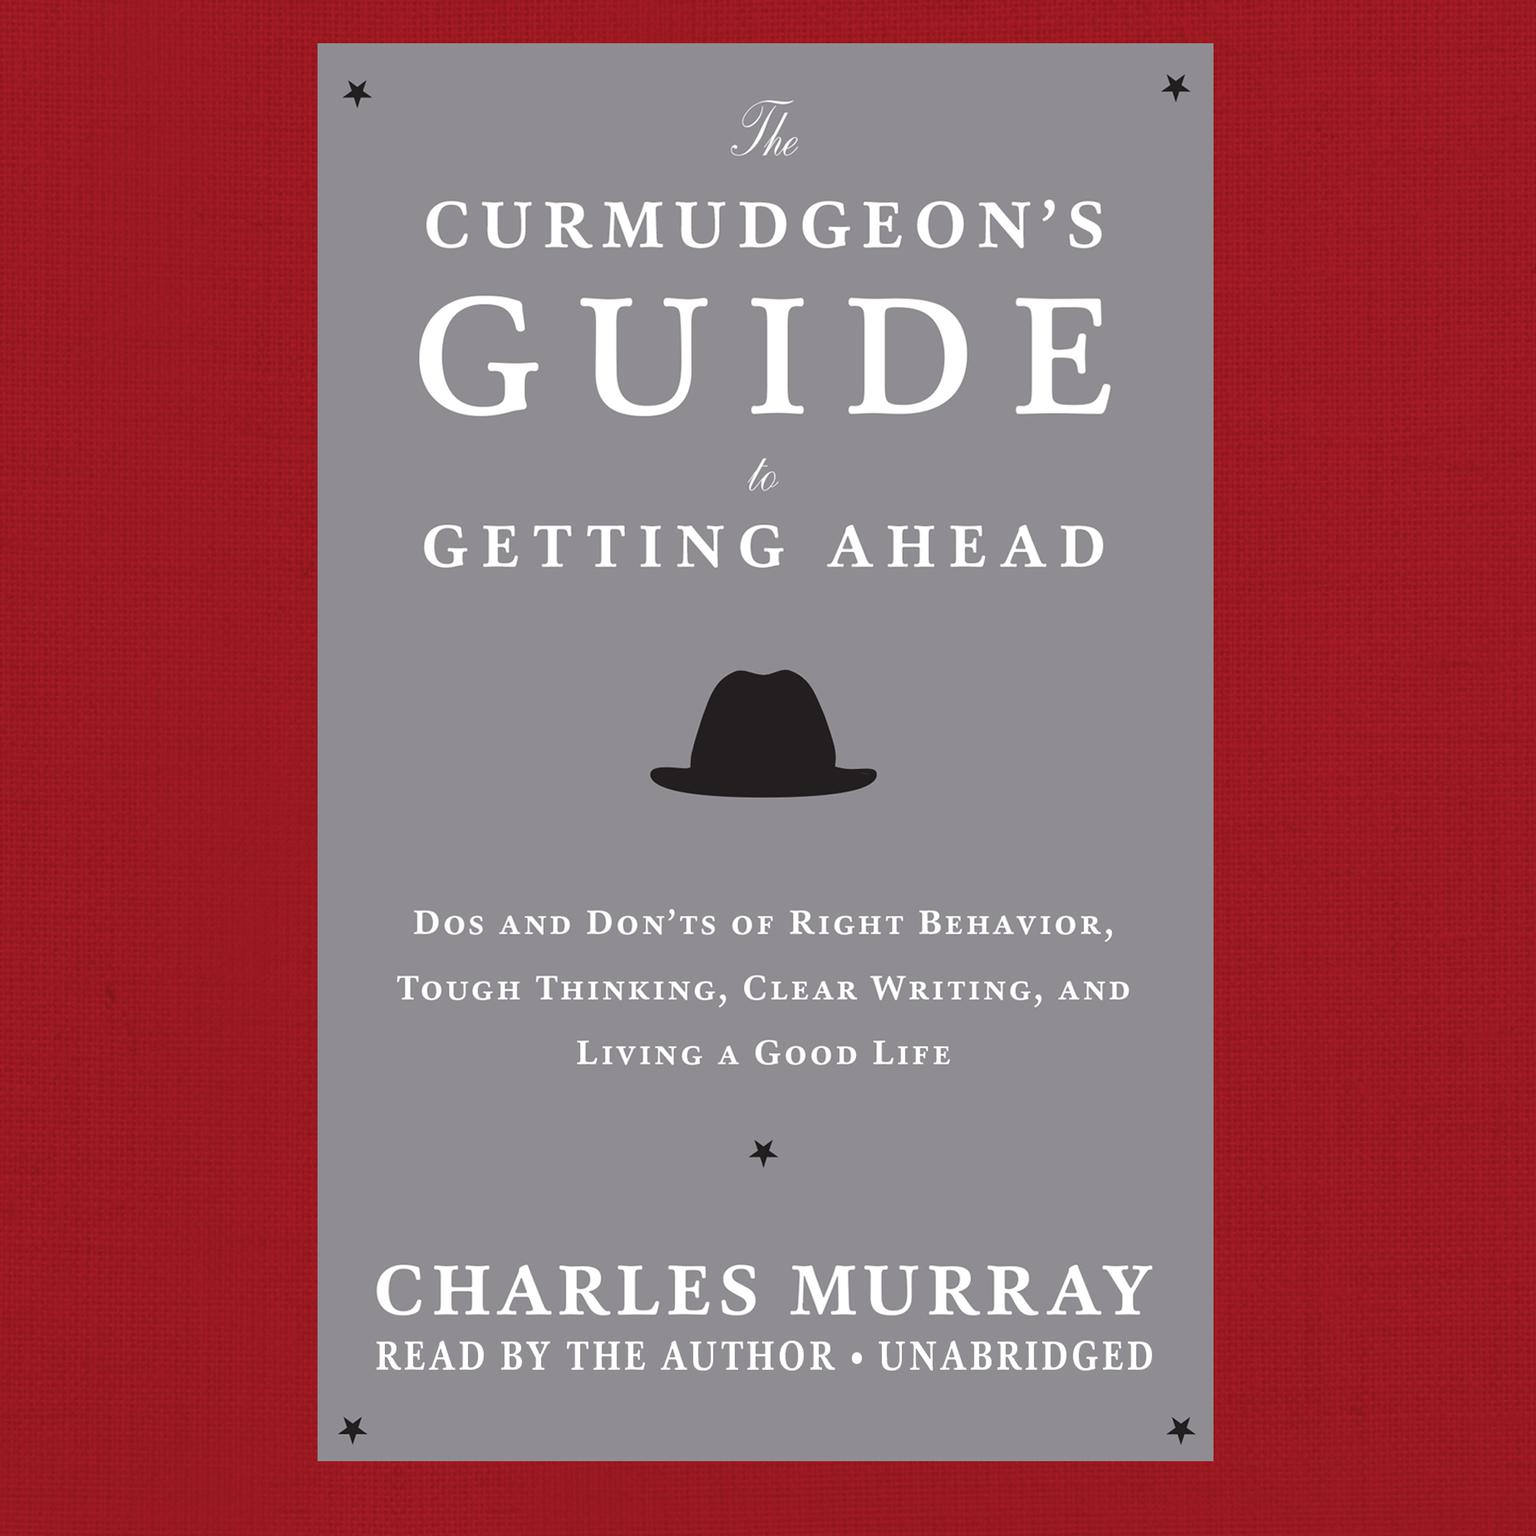 The Curmudgeon’s Guide to Getting Ahead: Dos and Don’ts of Right Behavior, Tough Thinking, Clear Writing, and Living a Good Life Audiobook, by Charles Murray